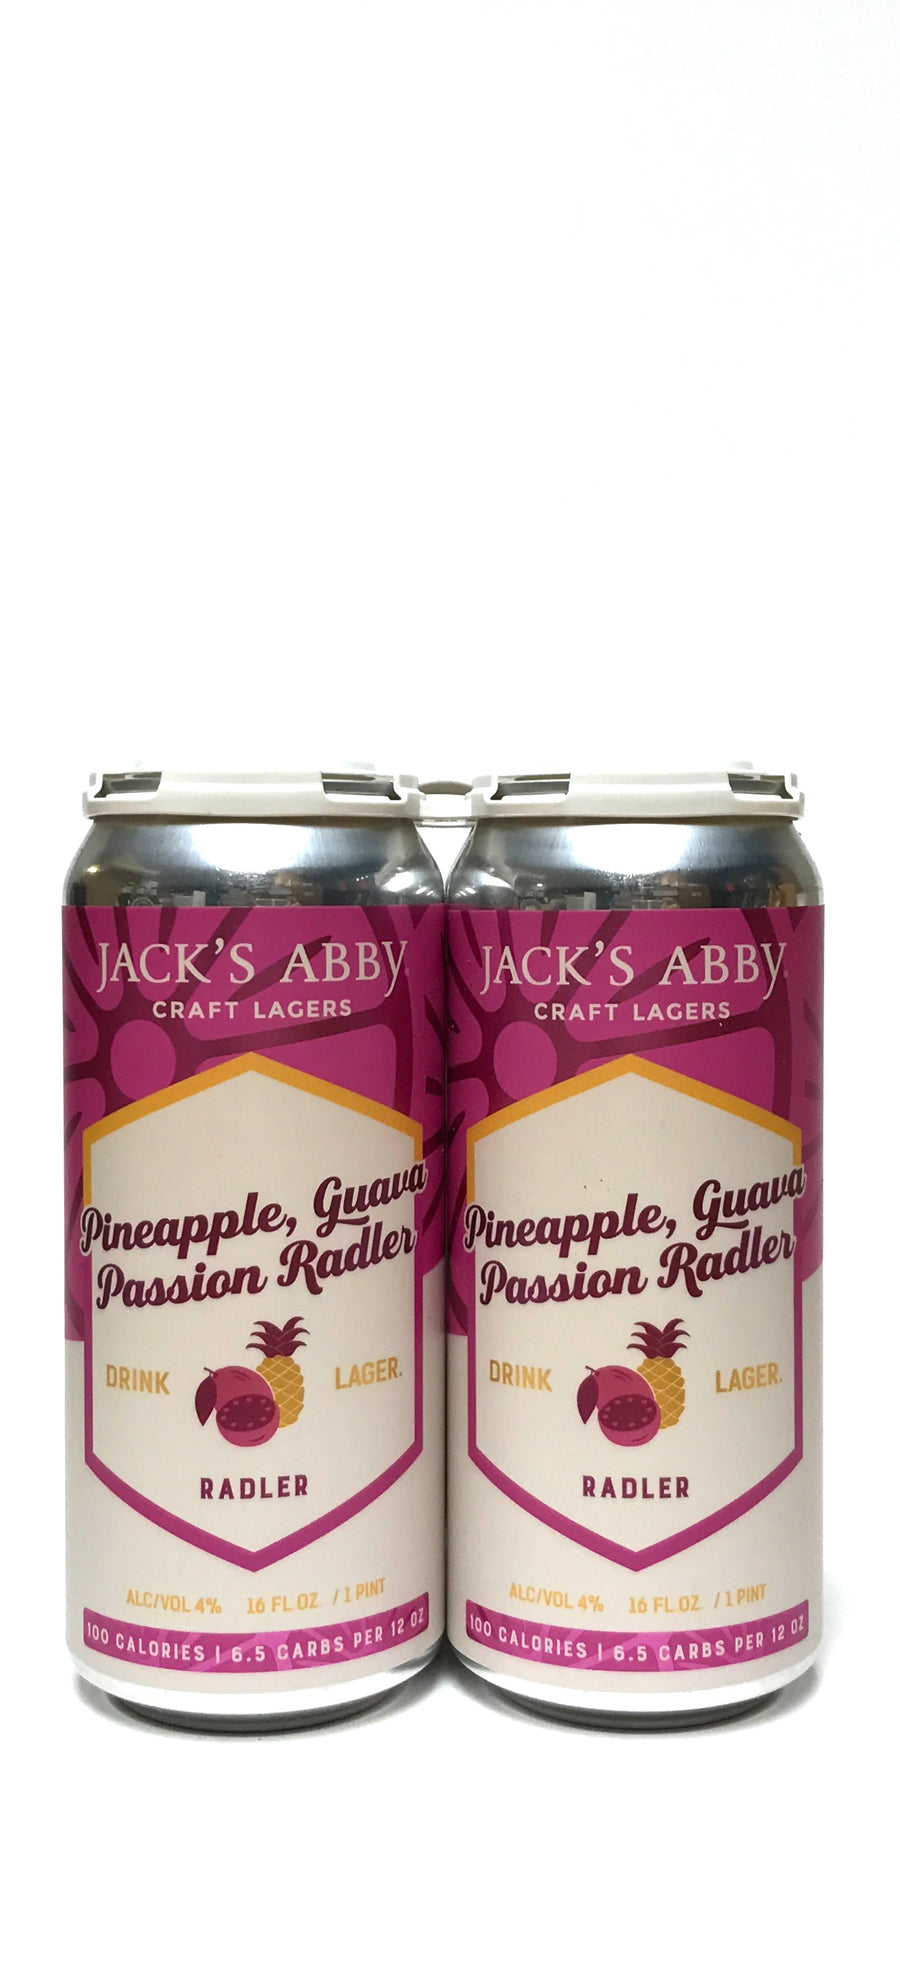 Jack’s Abby Pineapple, Guava, Passion Radler 16oz Can 4-Pack